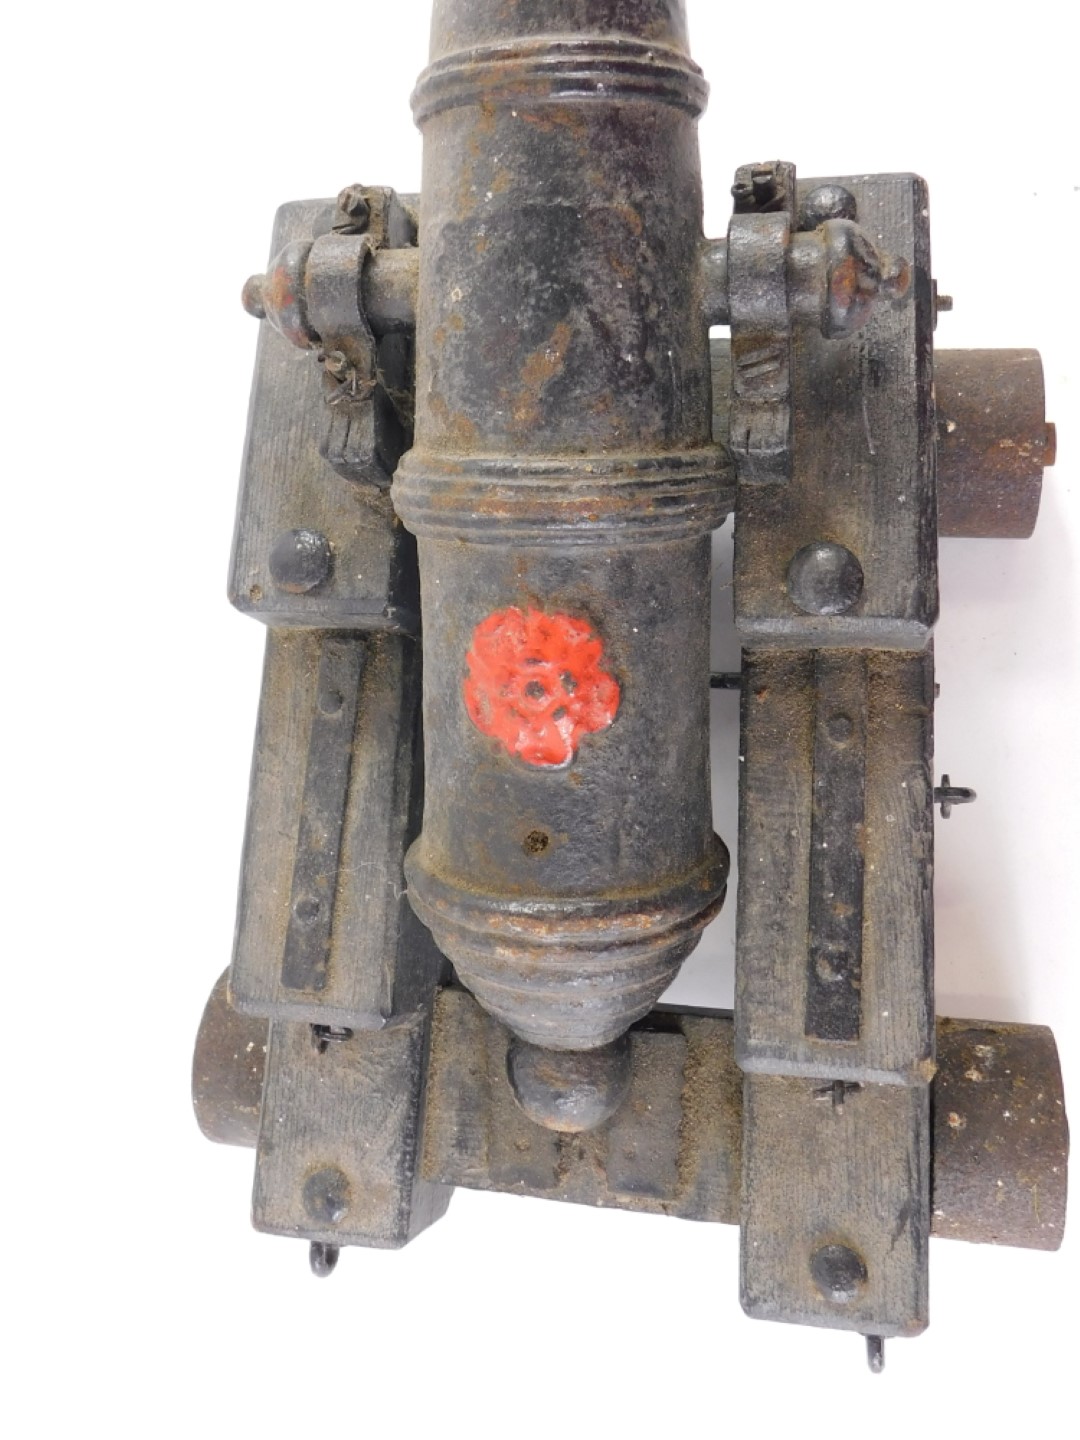 A 19thC signalling cannon, painted black, cast with a single flower head or rose, later painted in r - Image 2 of 2